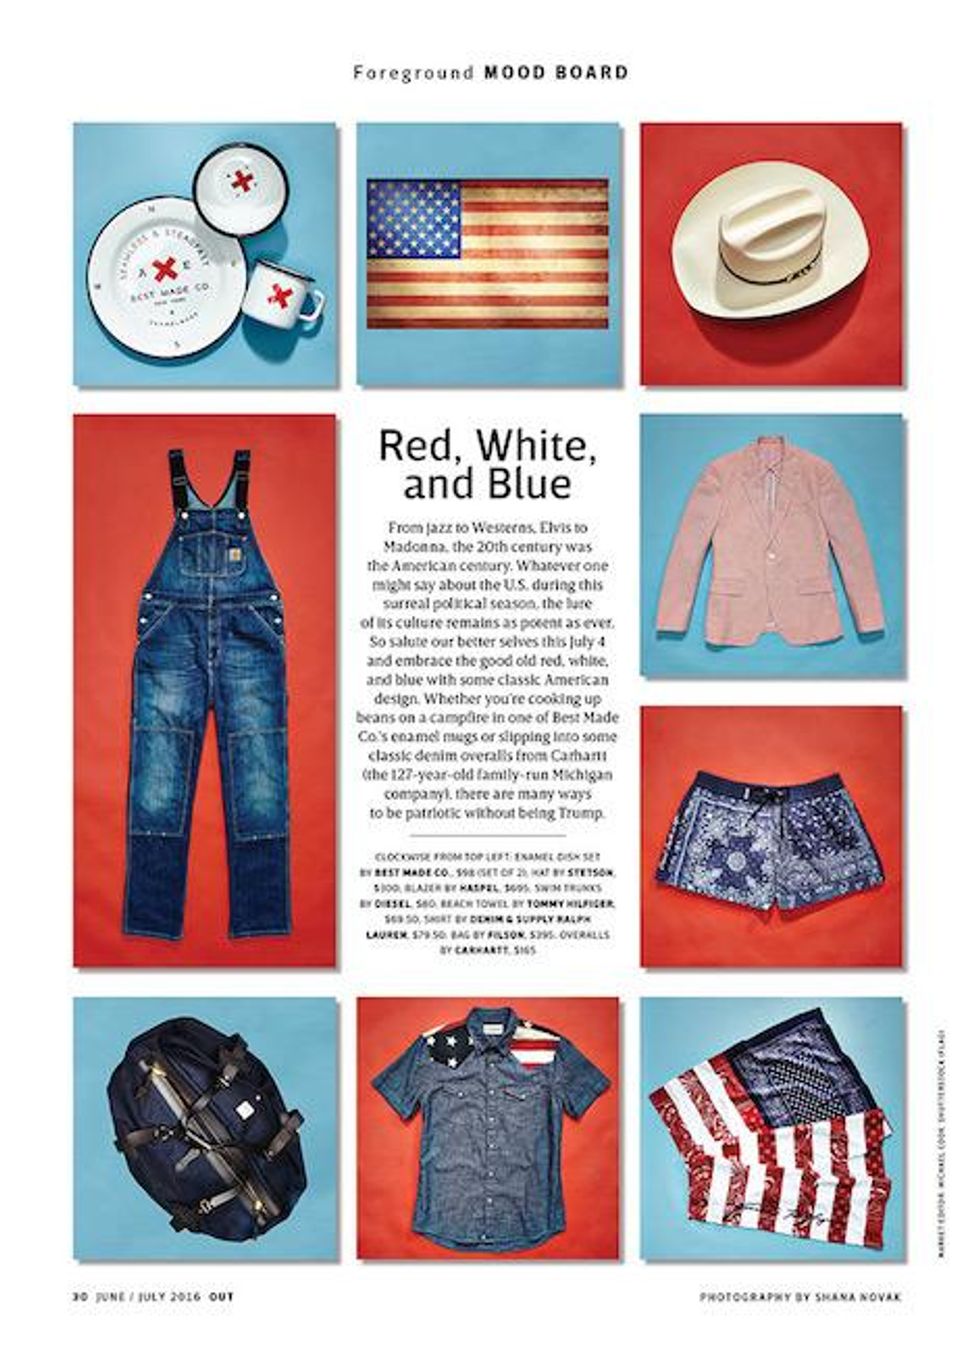 Moodboard: Red, White, and Blue